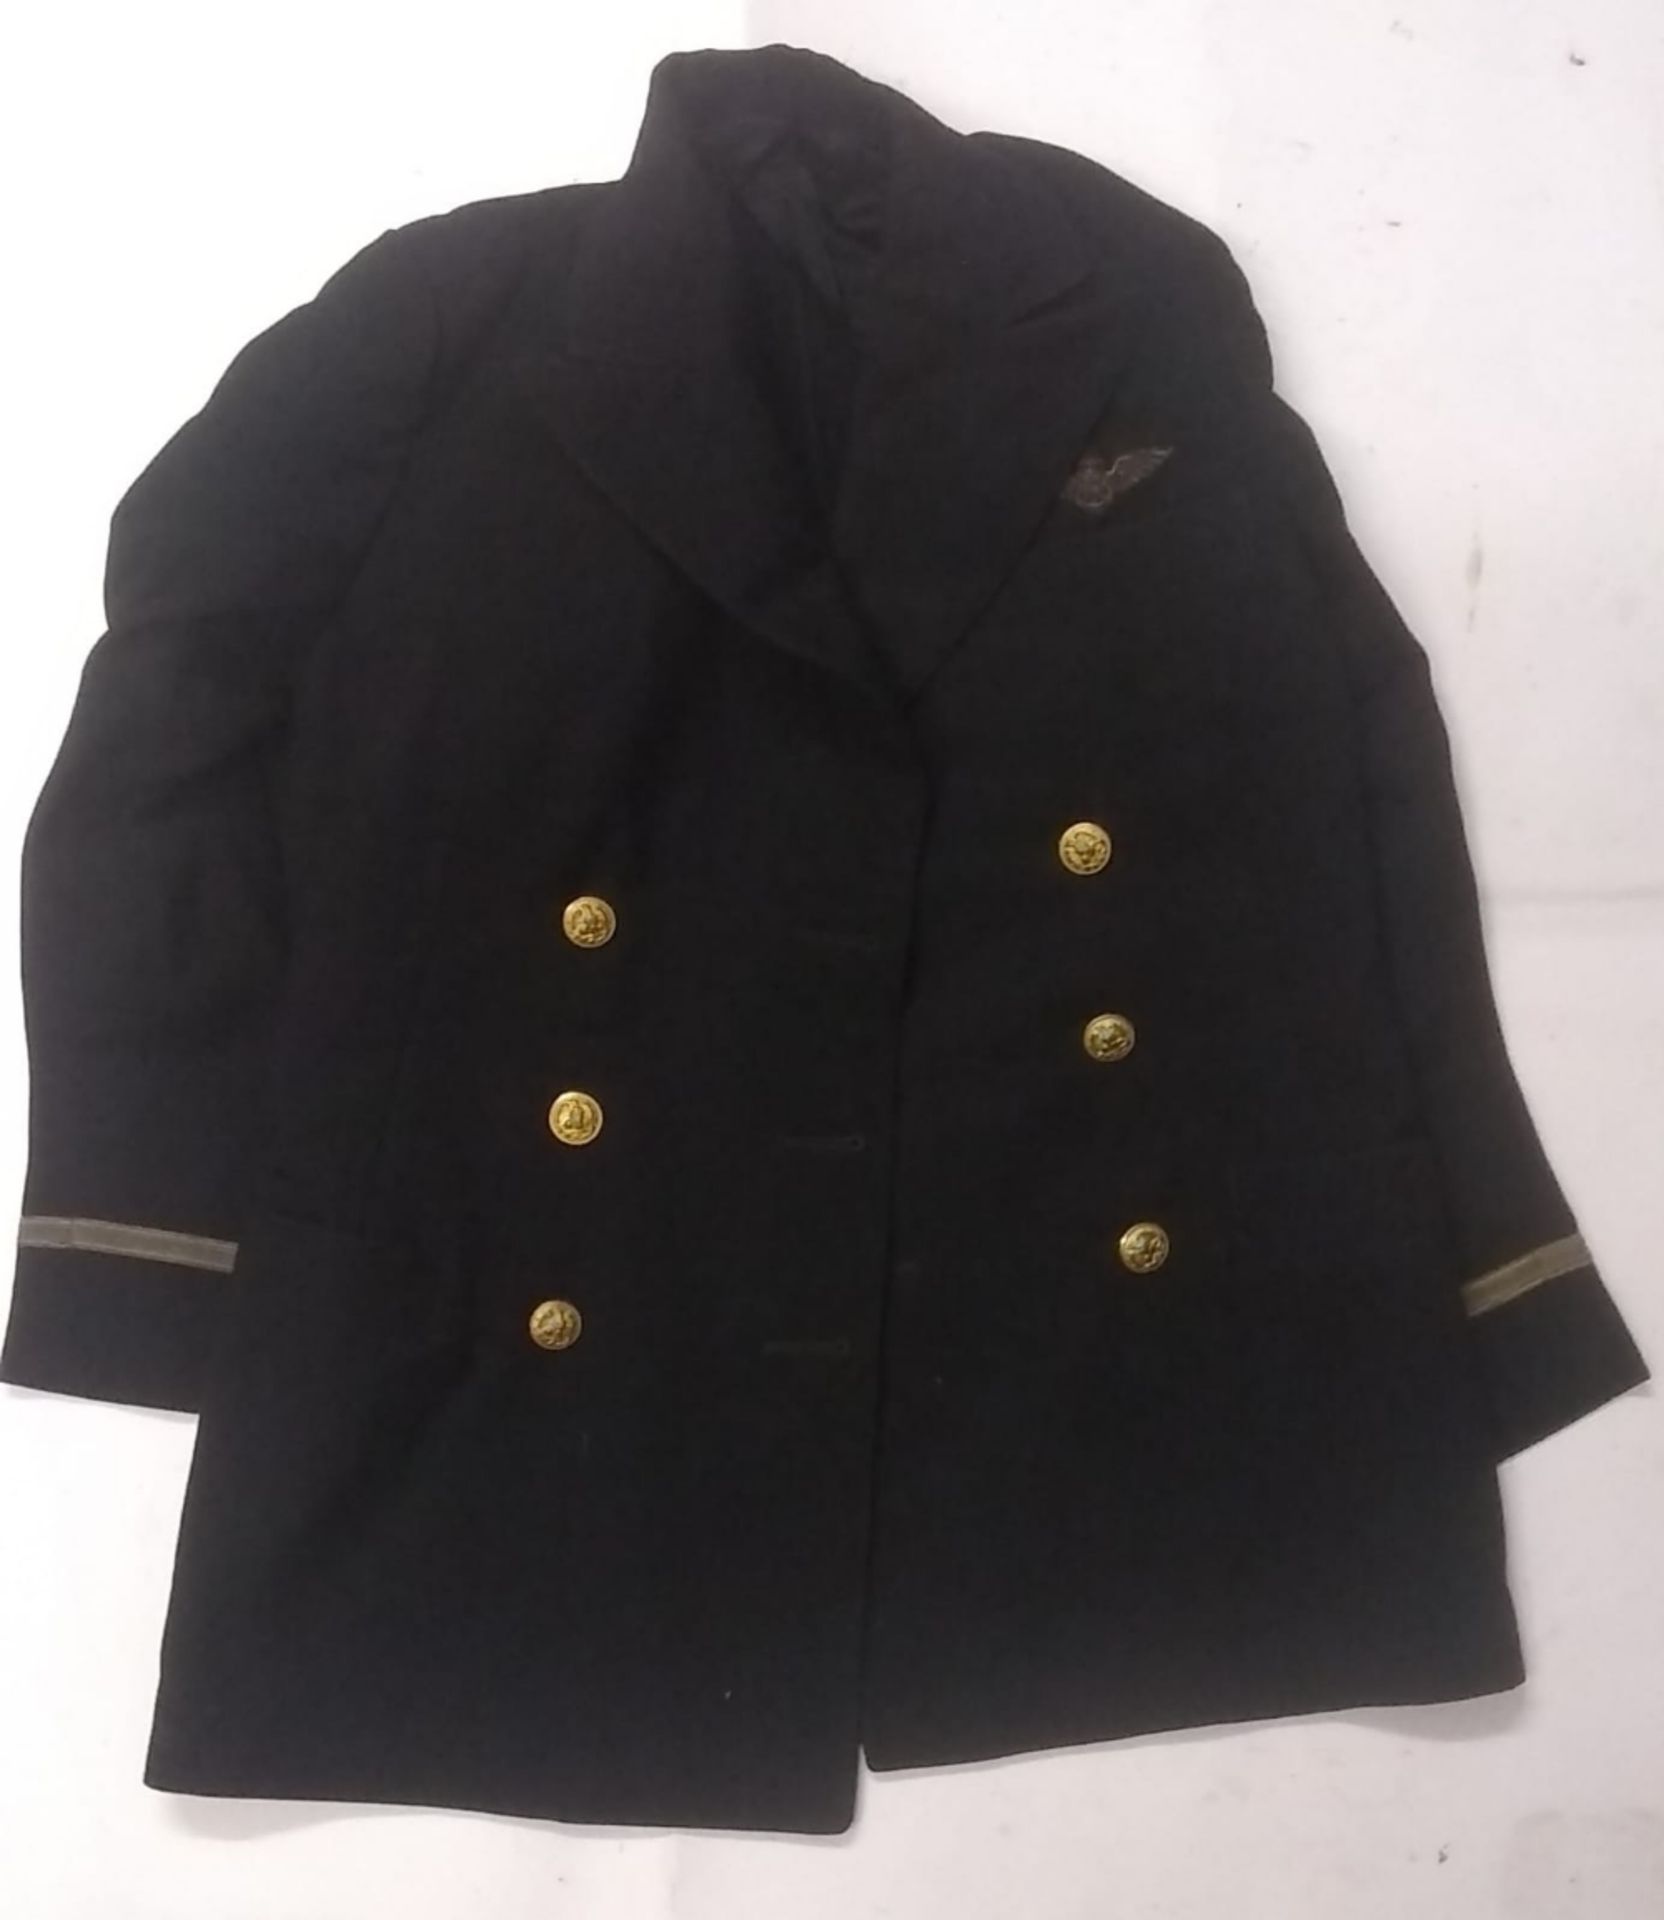 A WWII US Navy jacket. This lot will